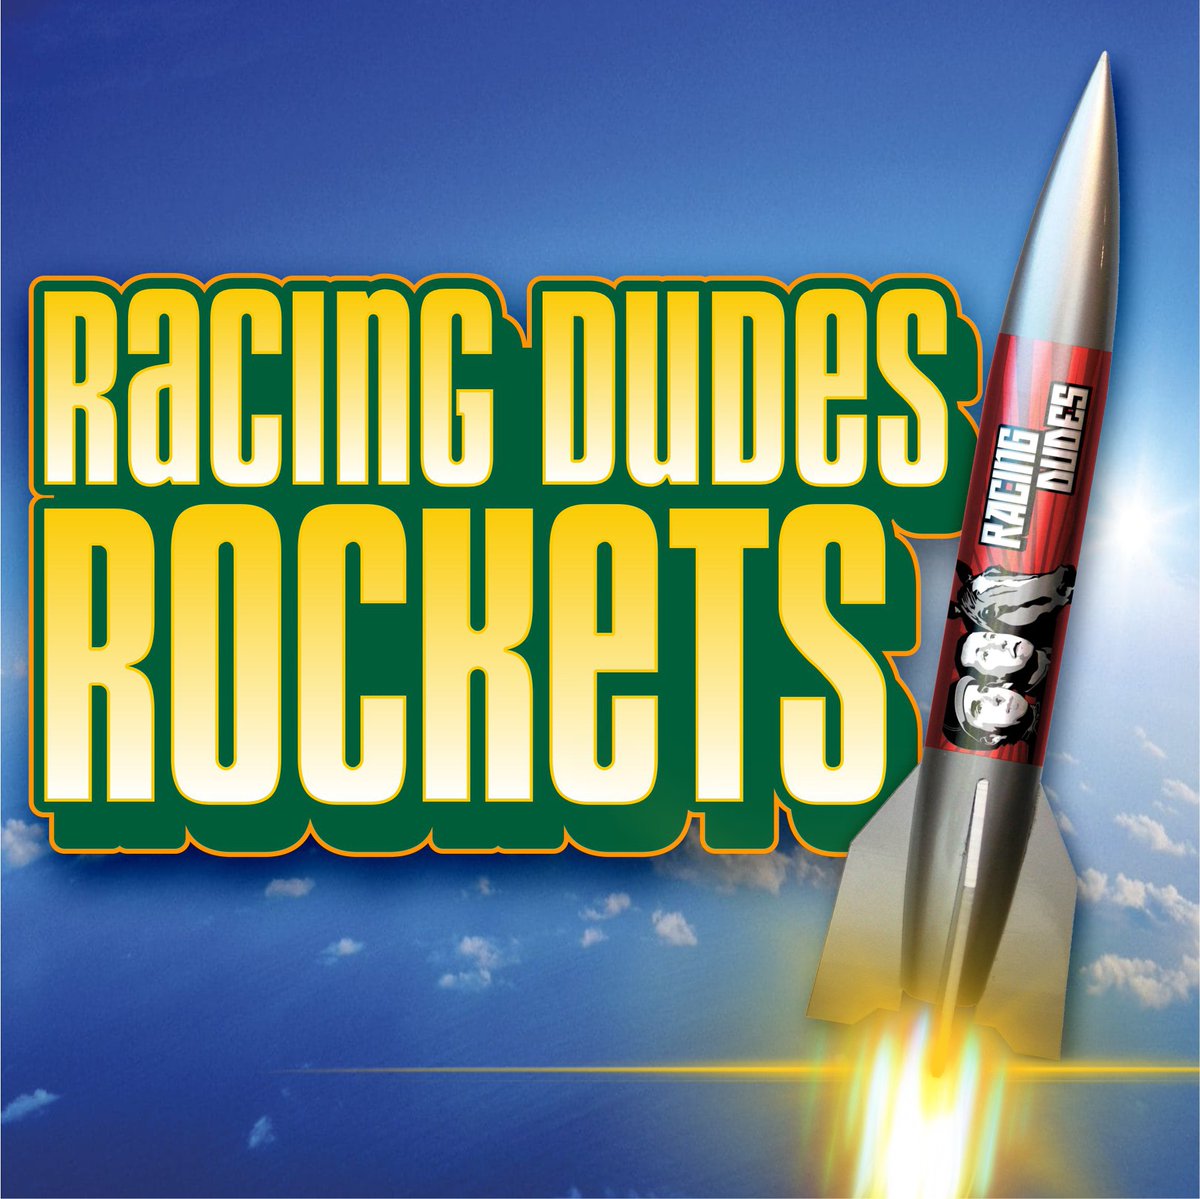 Let’s kick off another big Friday with the Racing Dudes Rocket Picks! Today, we have a FREE Late Pick 3 from Aqueduct! We also have full card selections for Keeneland and Oaklawn Park for the paid Rocket Picks, so check those out, too! Let’s GO! racingdudes.com/rocket-picks-%…